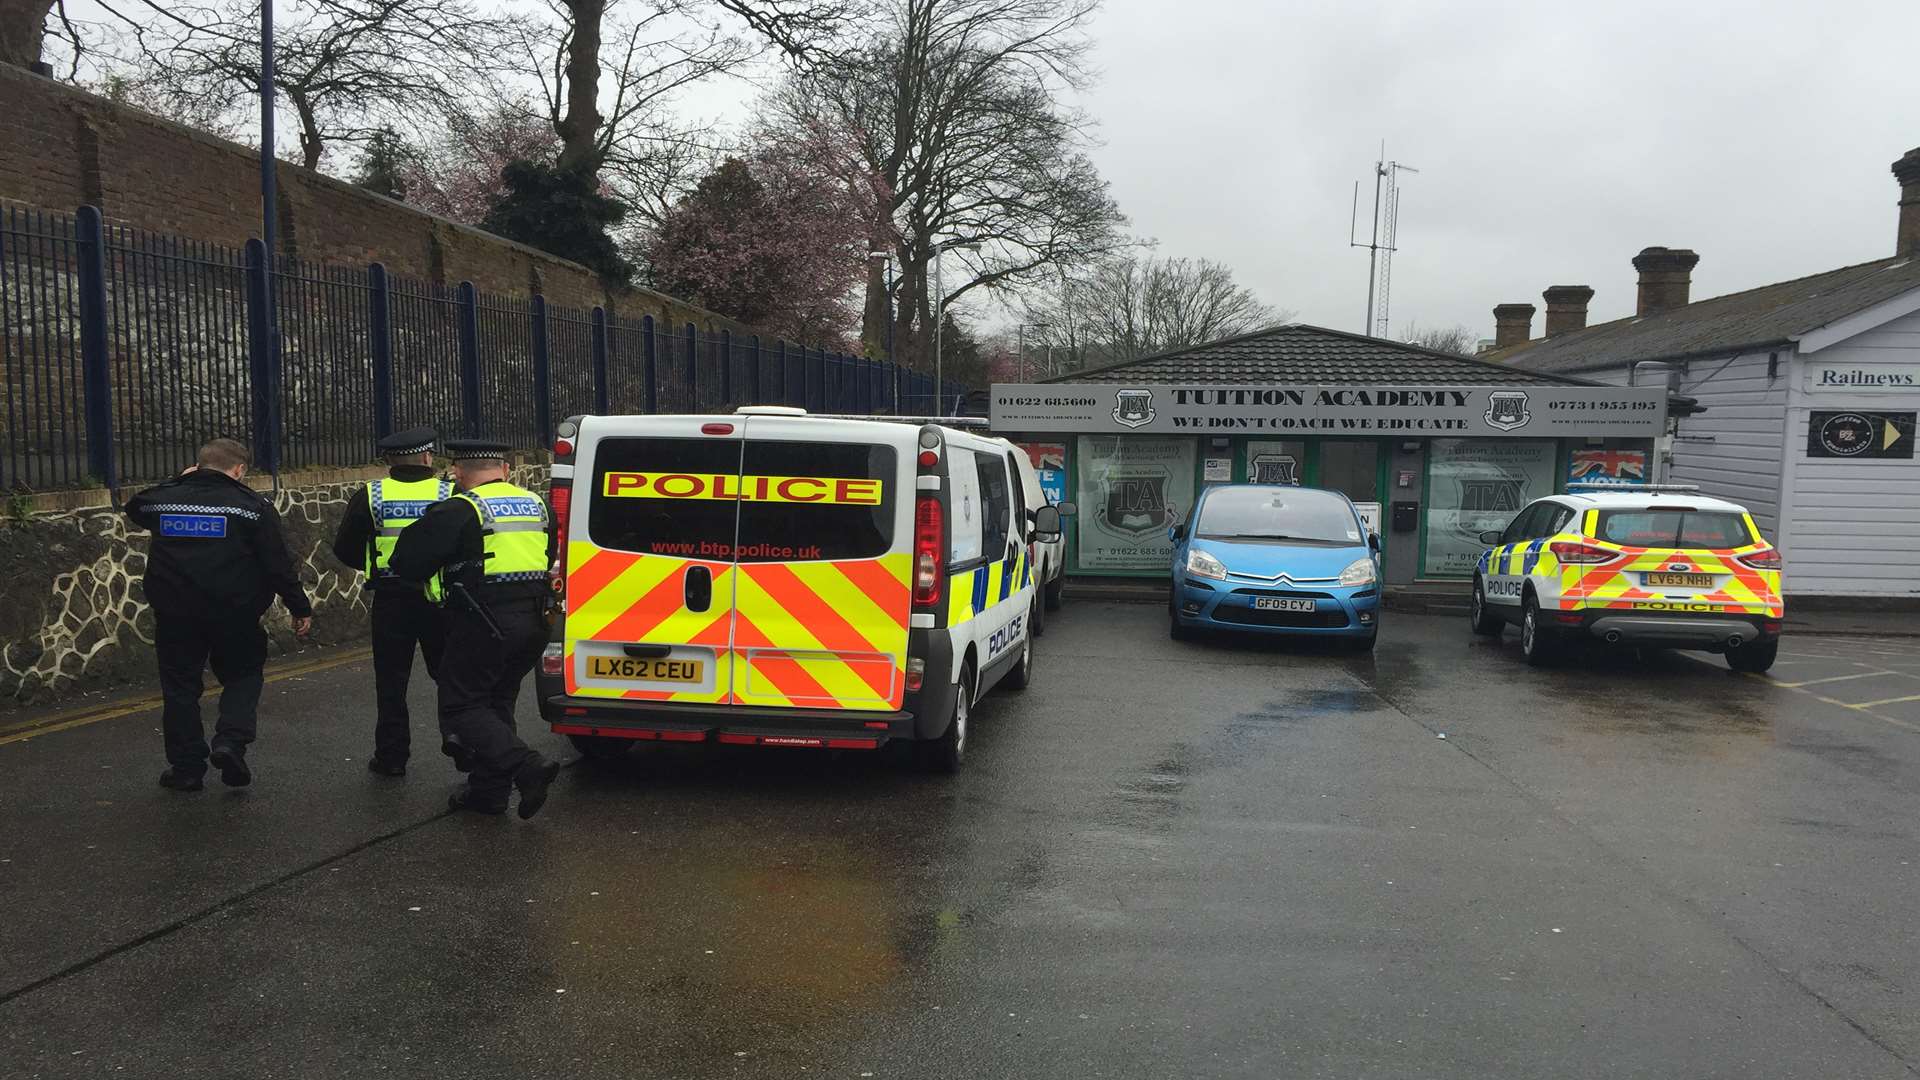 Police at Maidstone East station